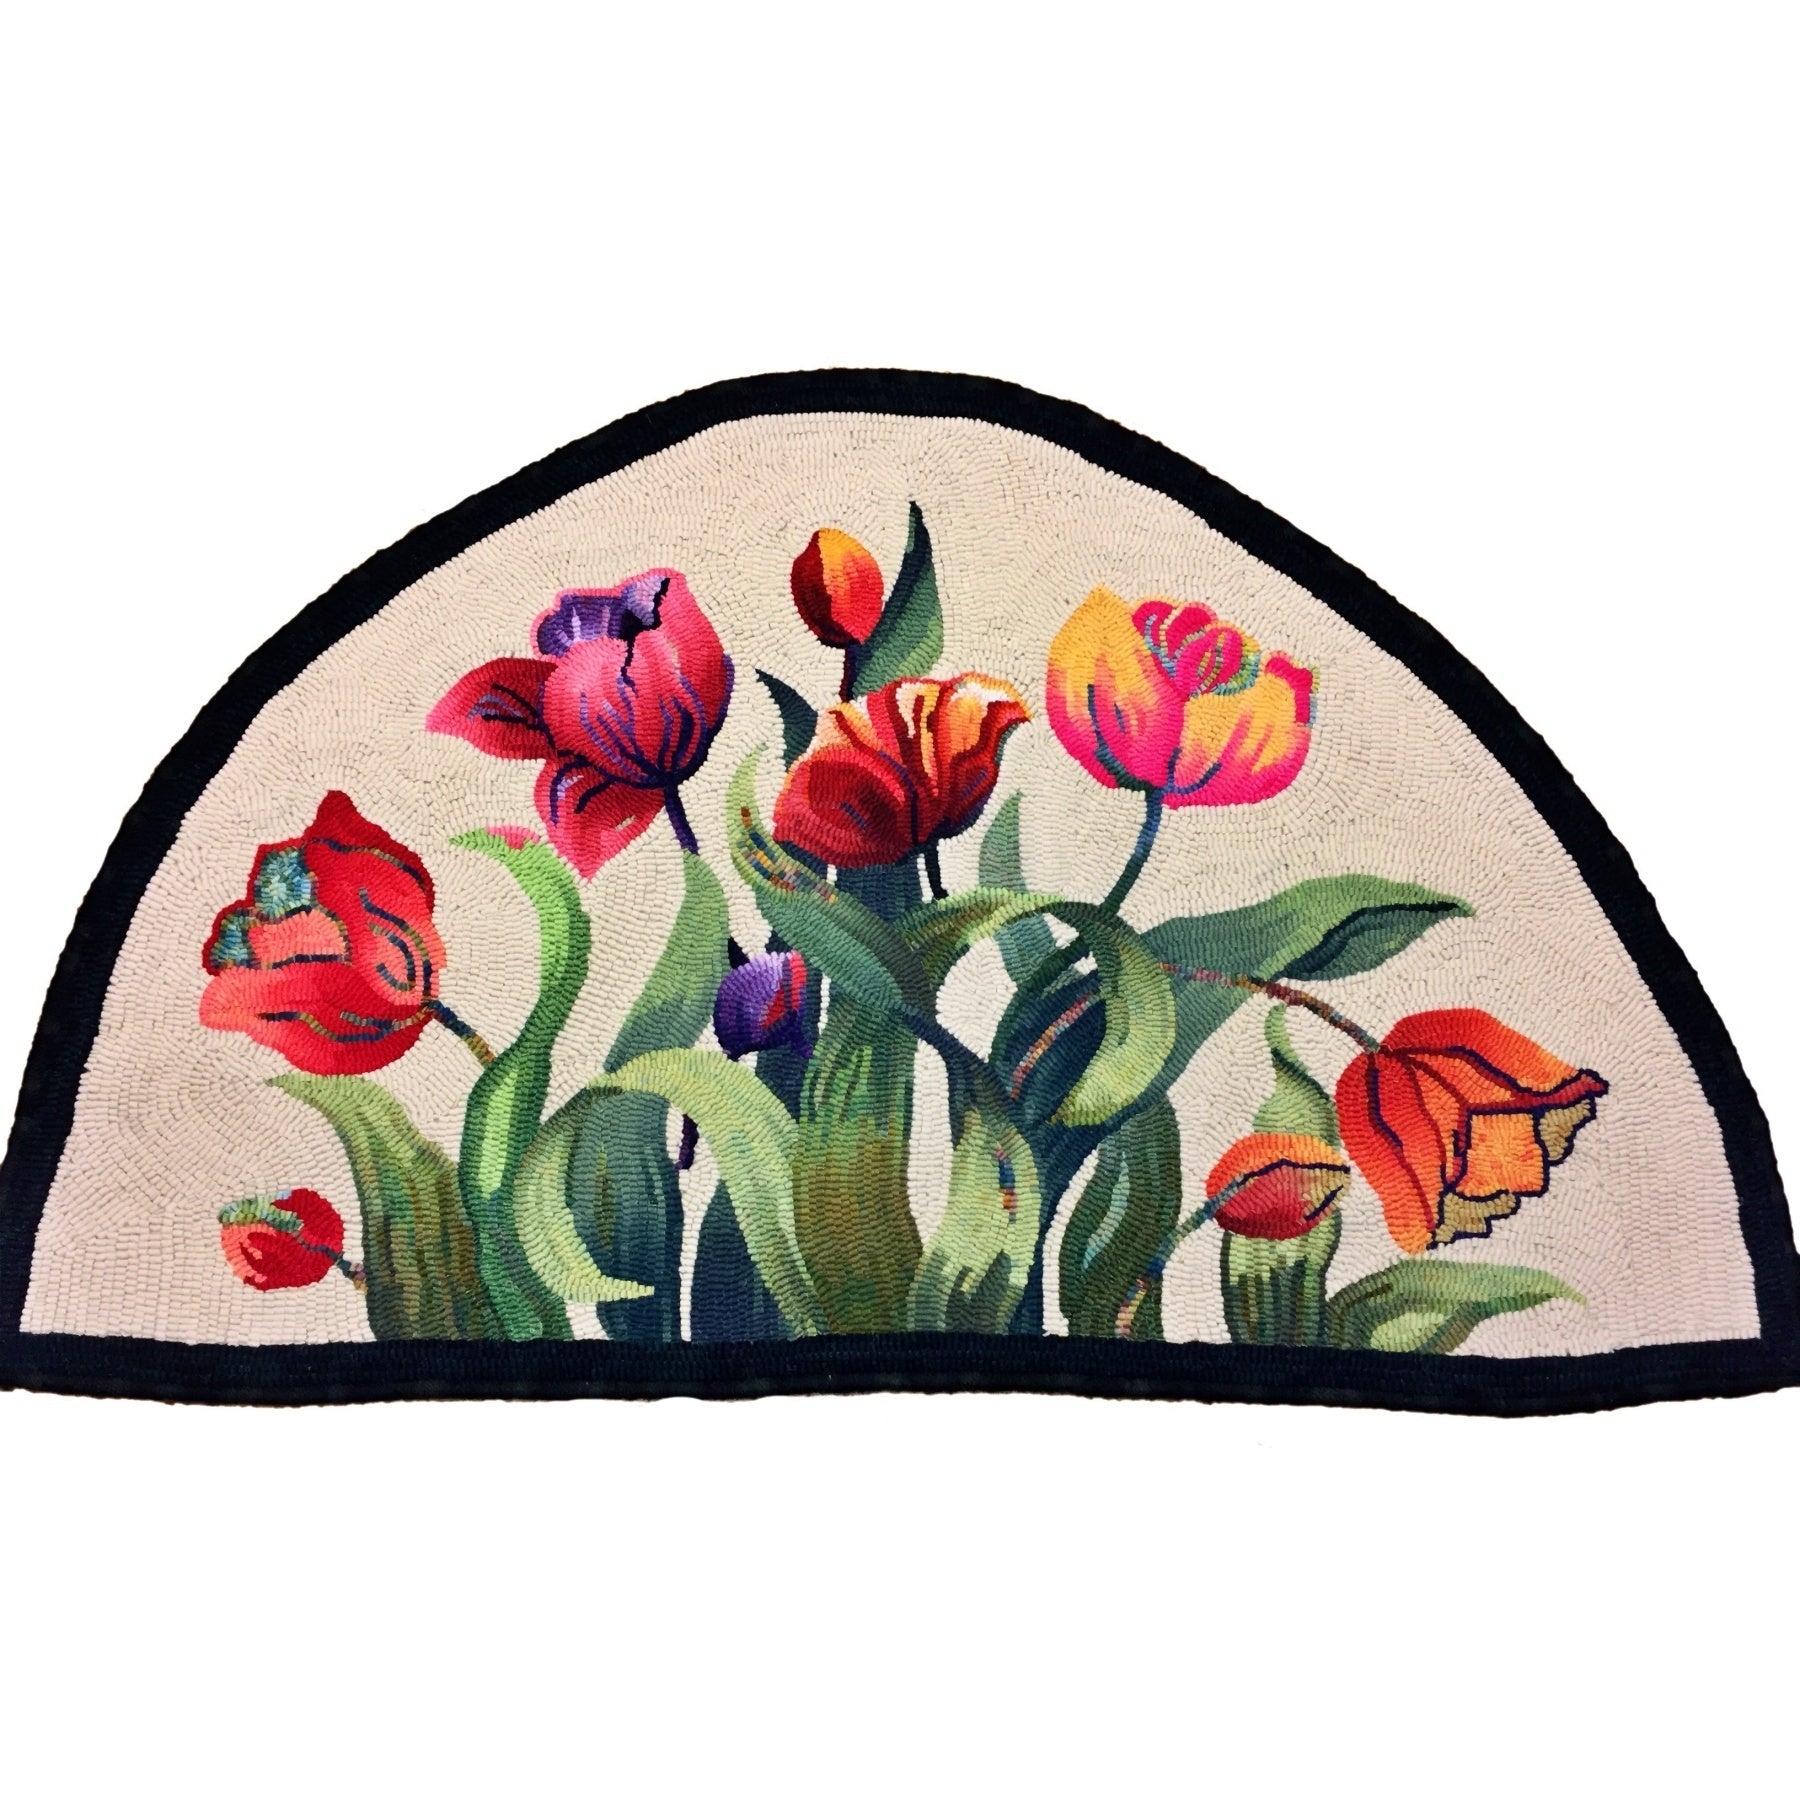 Tulip Time, rug hooked by Marg Miller